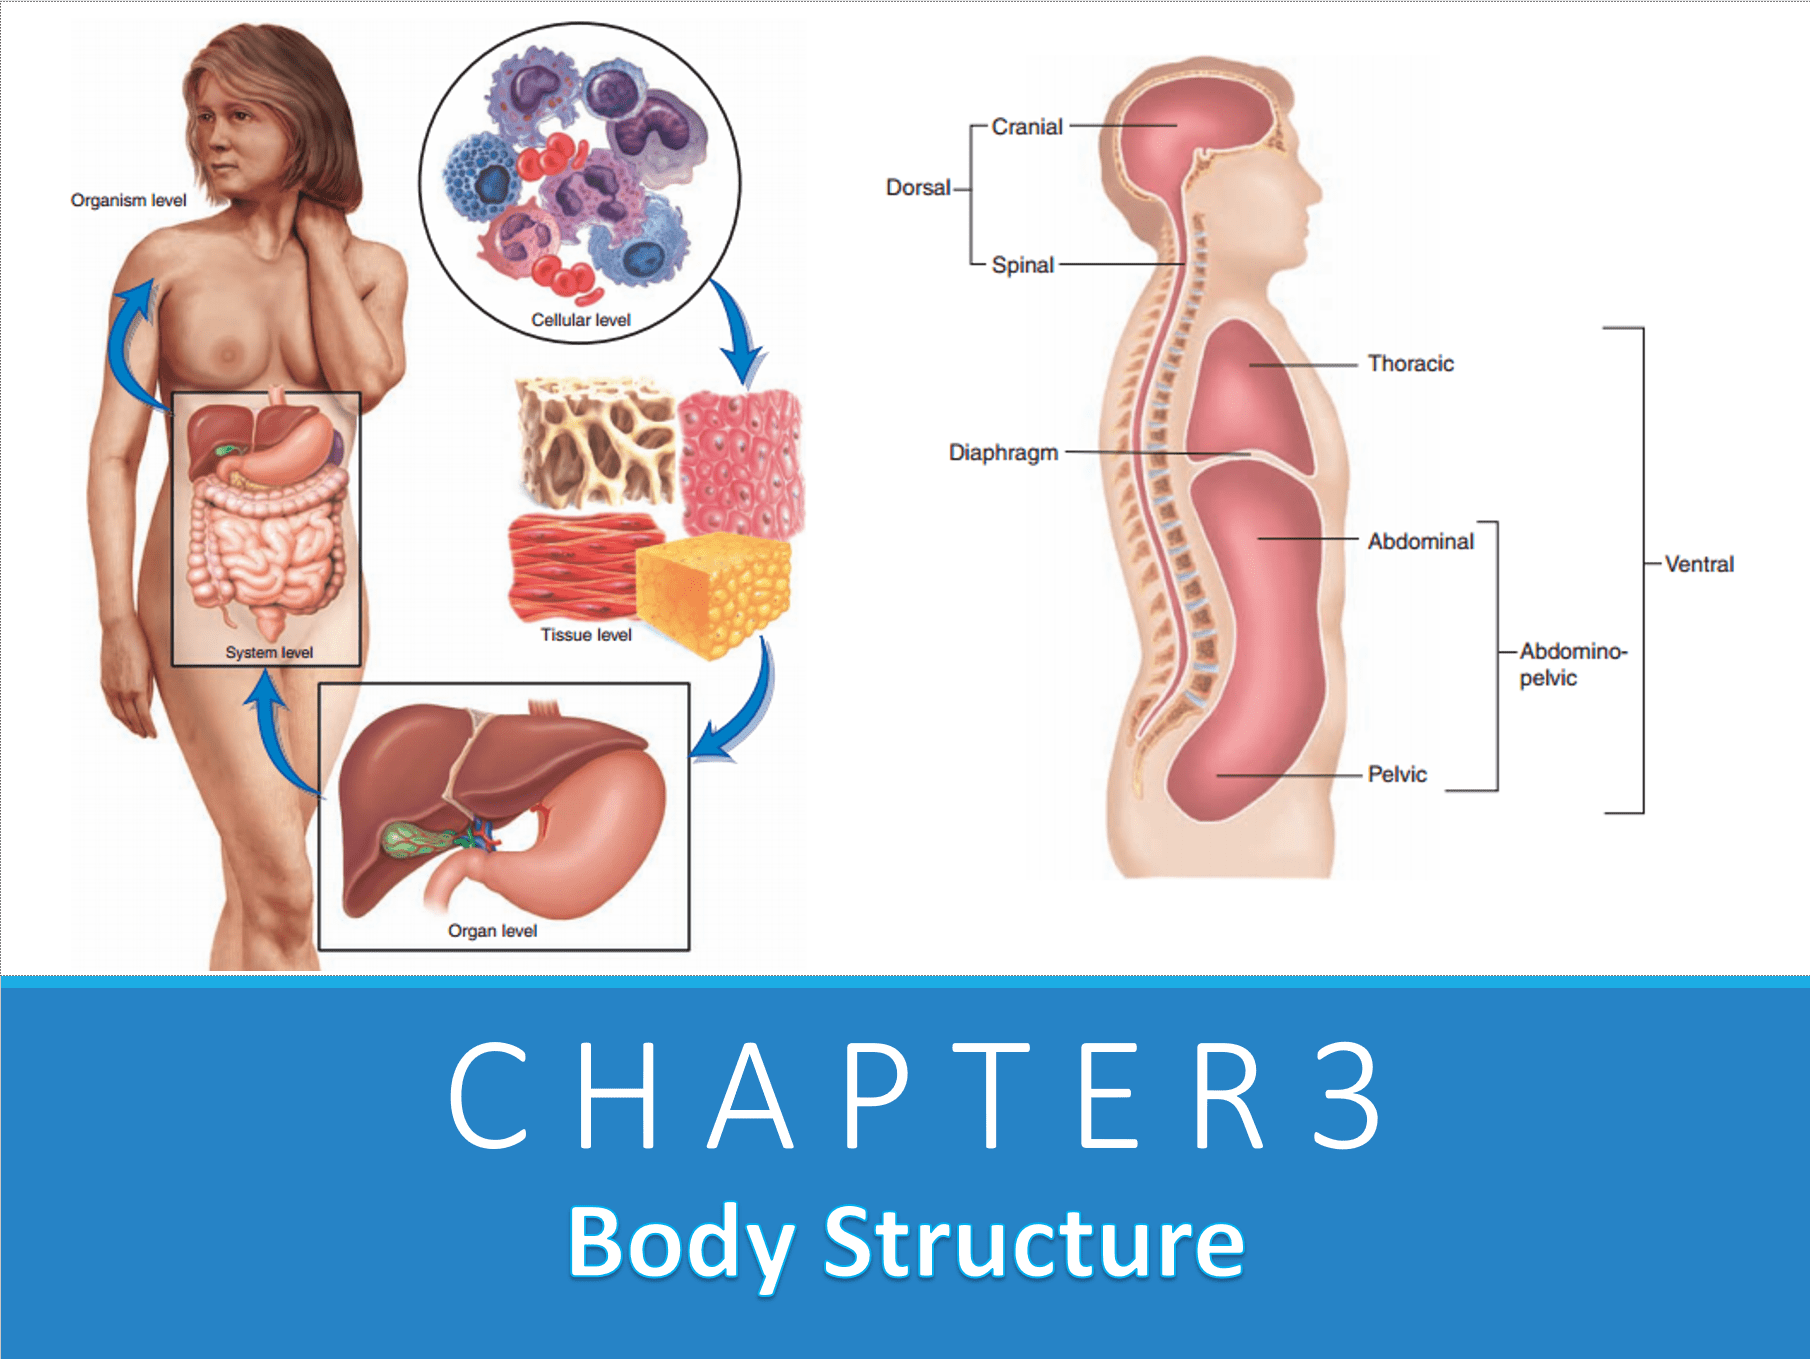 Chapter 3 – Body Structure